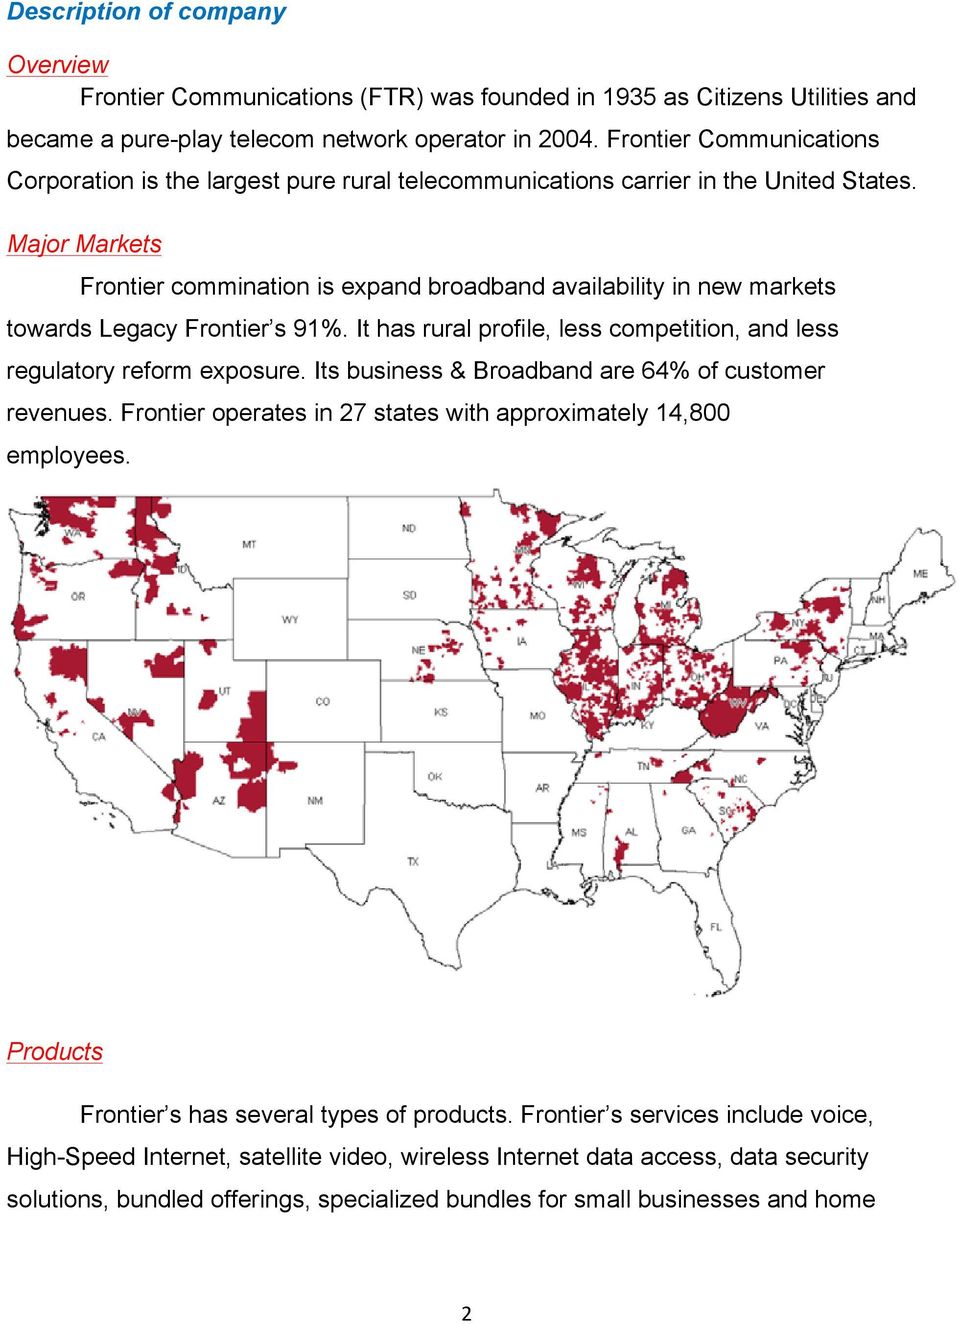 Major Markets Frontier commination is expand broadband availability in new markets towards Legacy Frontier s 91%. It has rural profile, less competition, and less regulatory reform exposure.